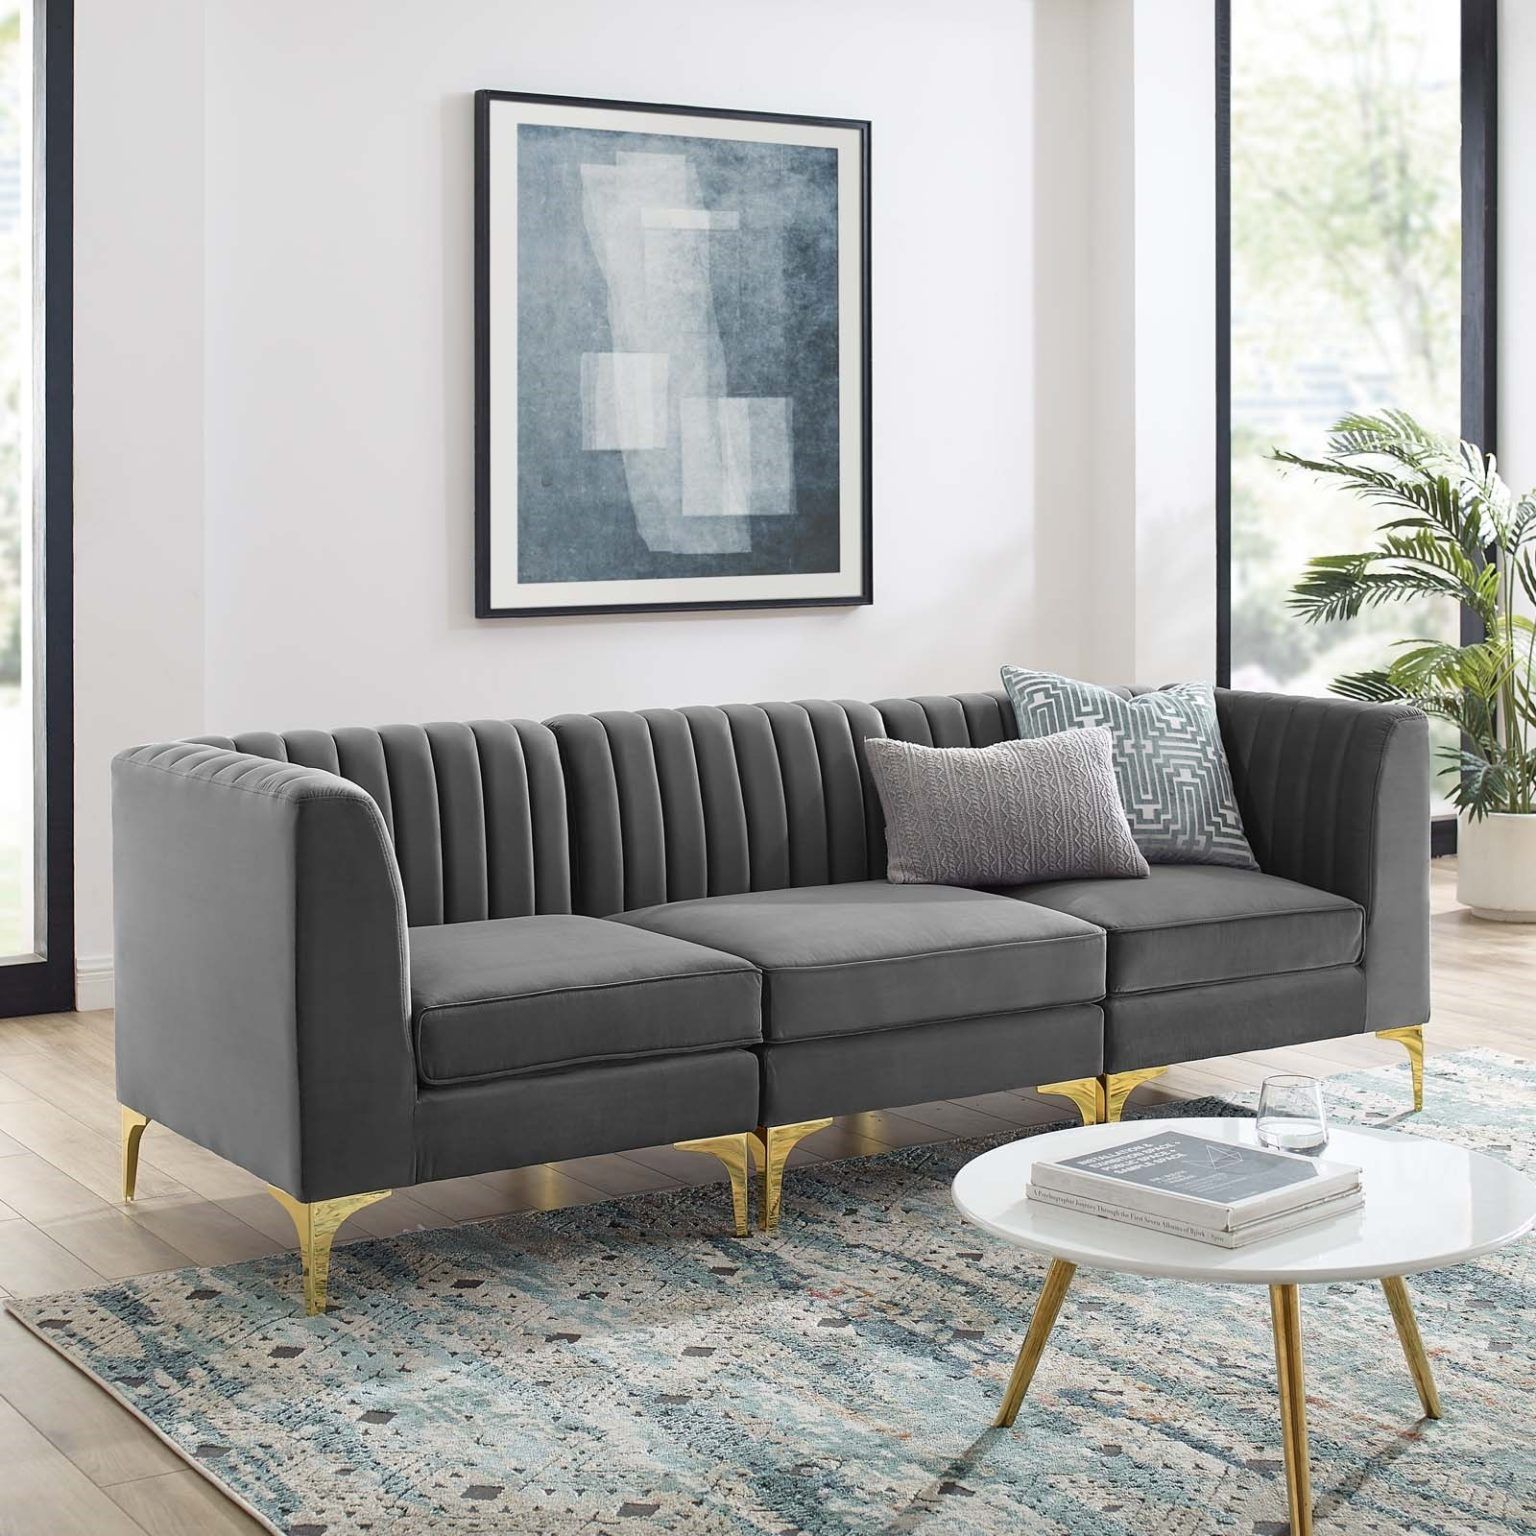 Triumph Channel Tufted Performance Velvet 3 Seater Sofa In Gray – Hyme With Regard To Modern Light Grey Loveseat Sofas (View 15 of 20)